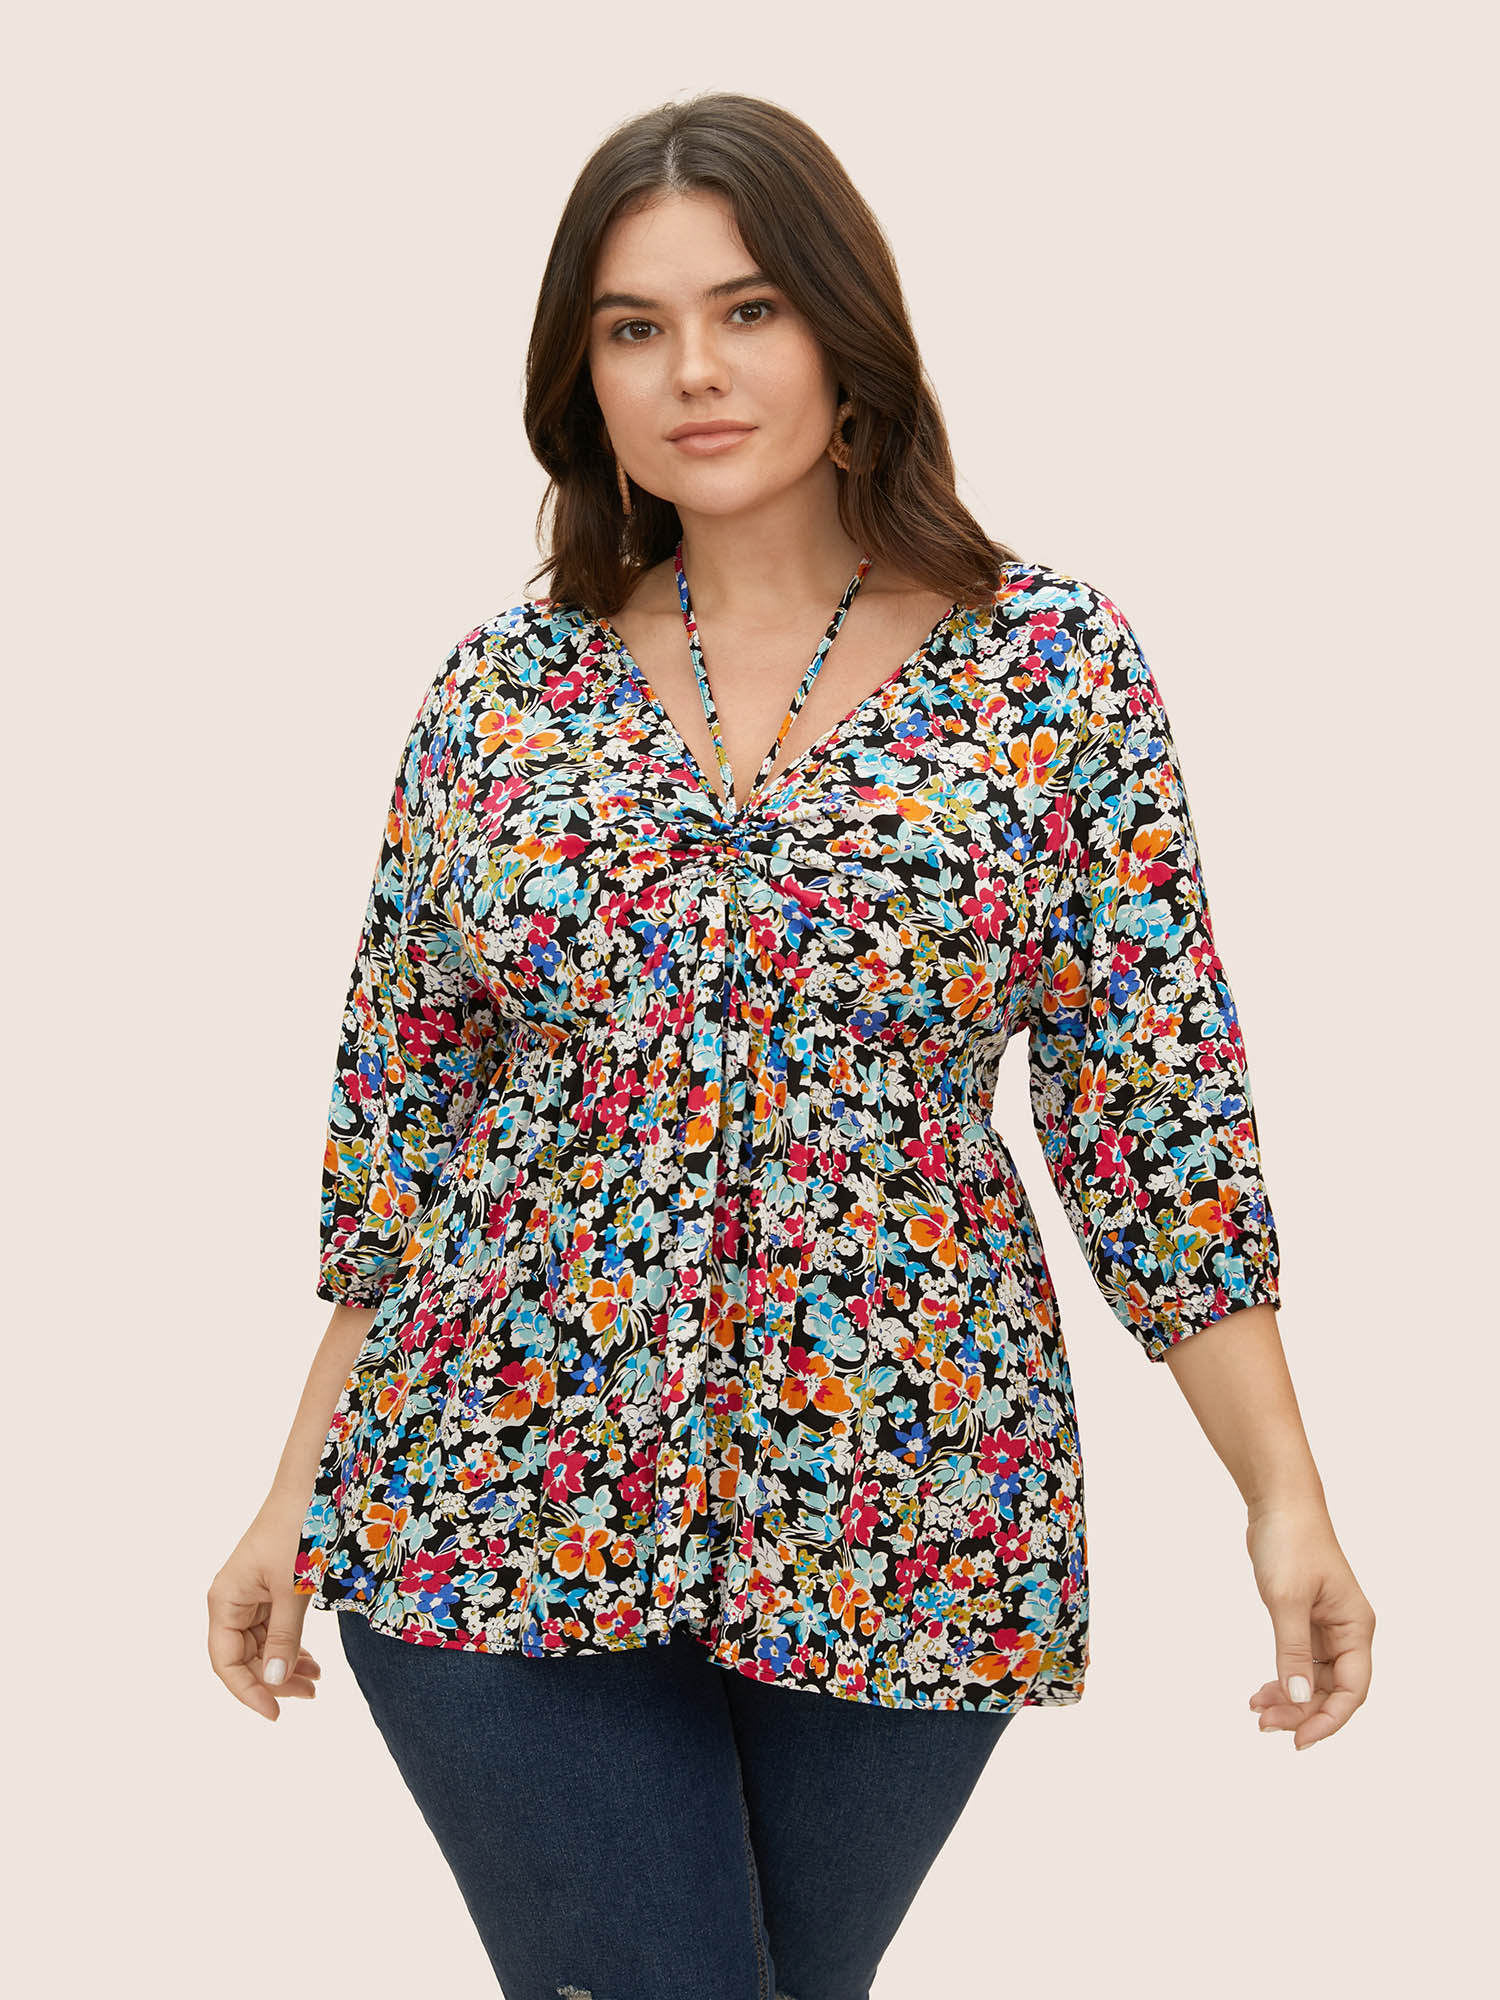 

Plus Size Black Colored Floral Tie Knot Lantern Sleeve Blouse Women Resort Elbow-length sleeve V-neck Vacation Blouses BloomChic